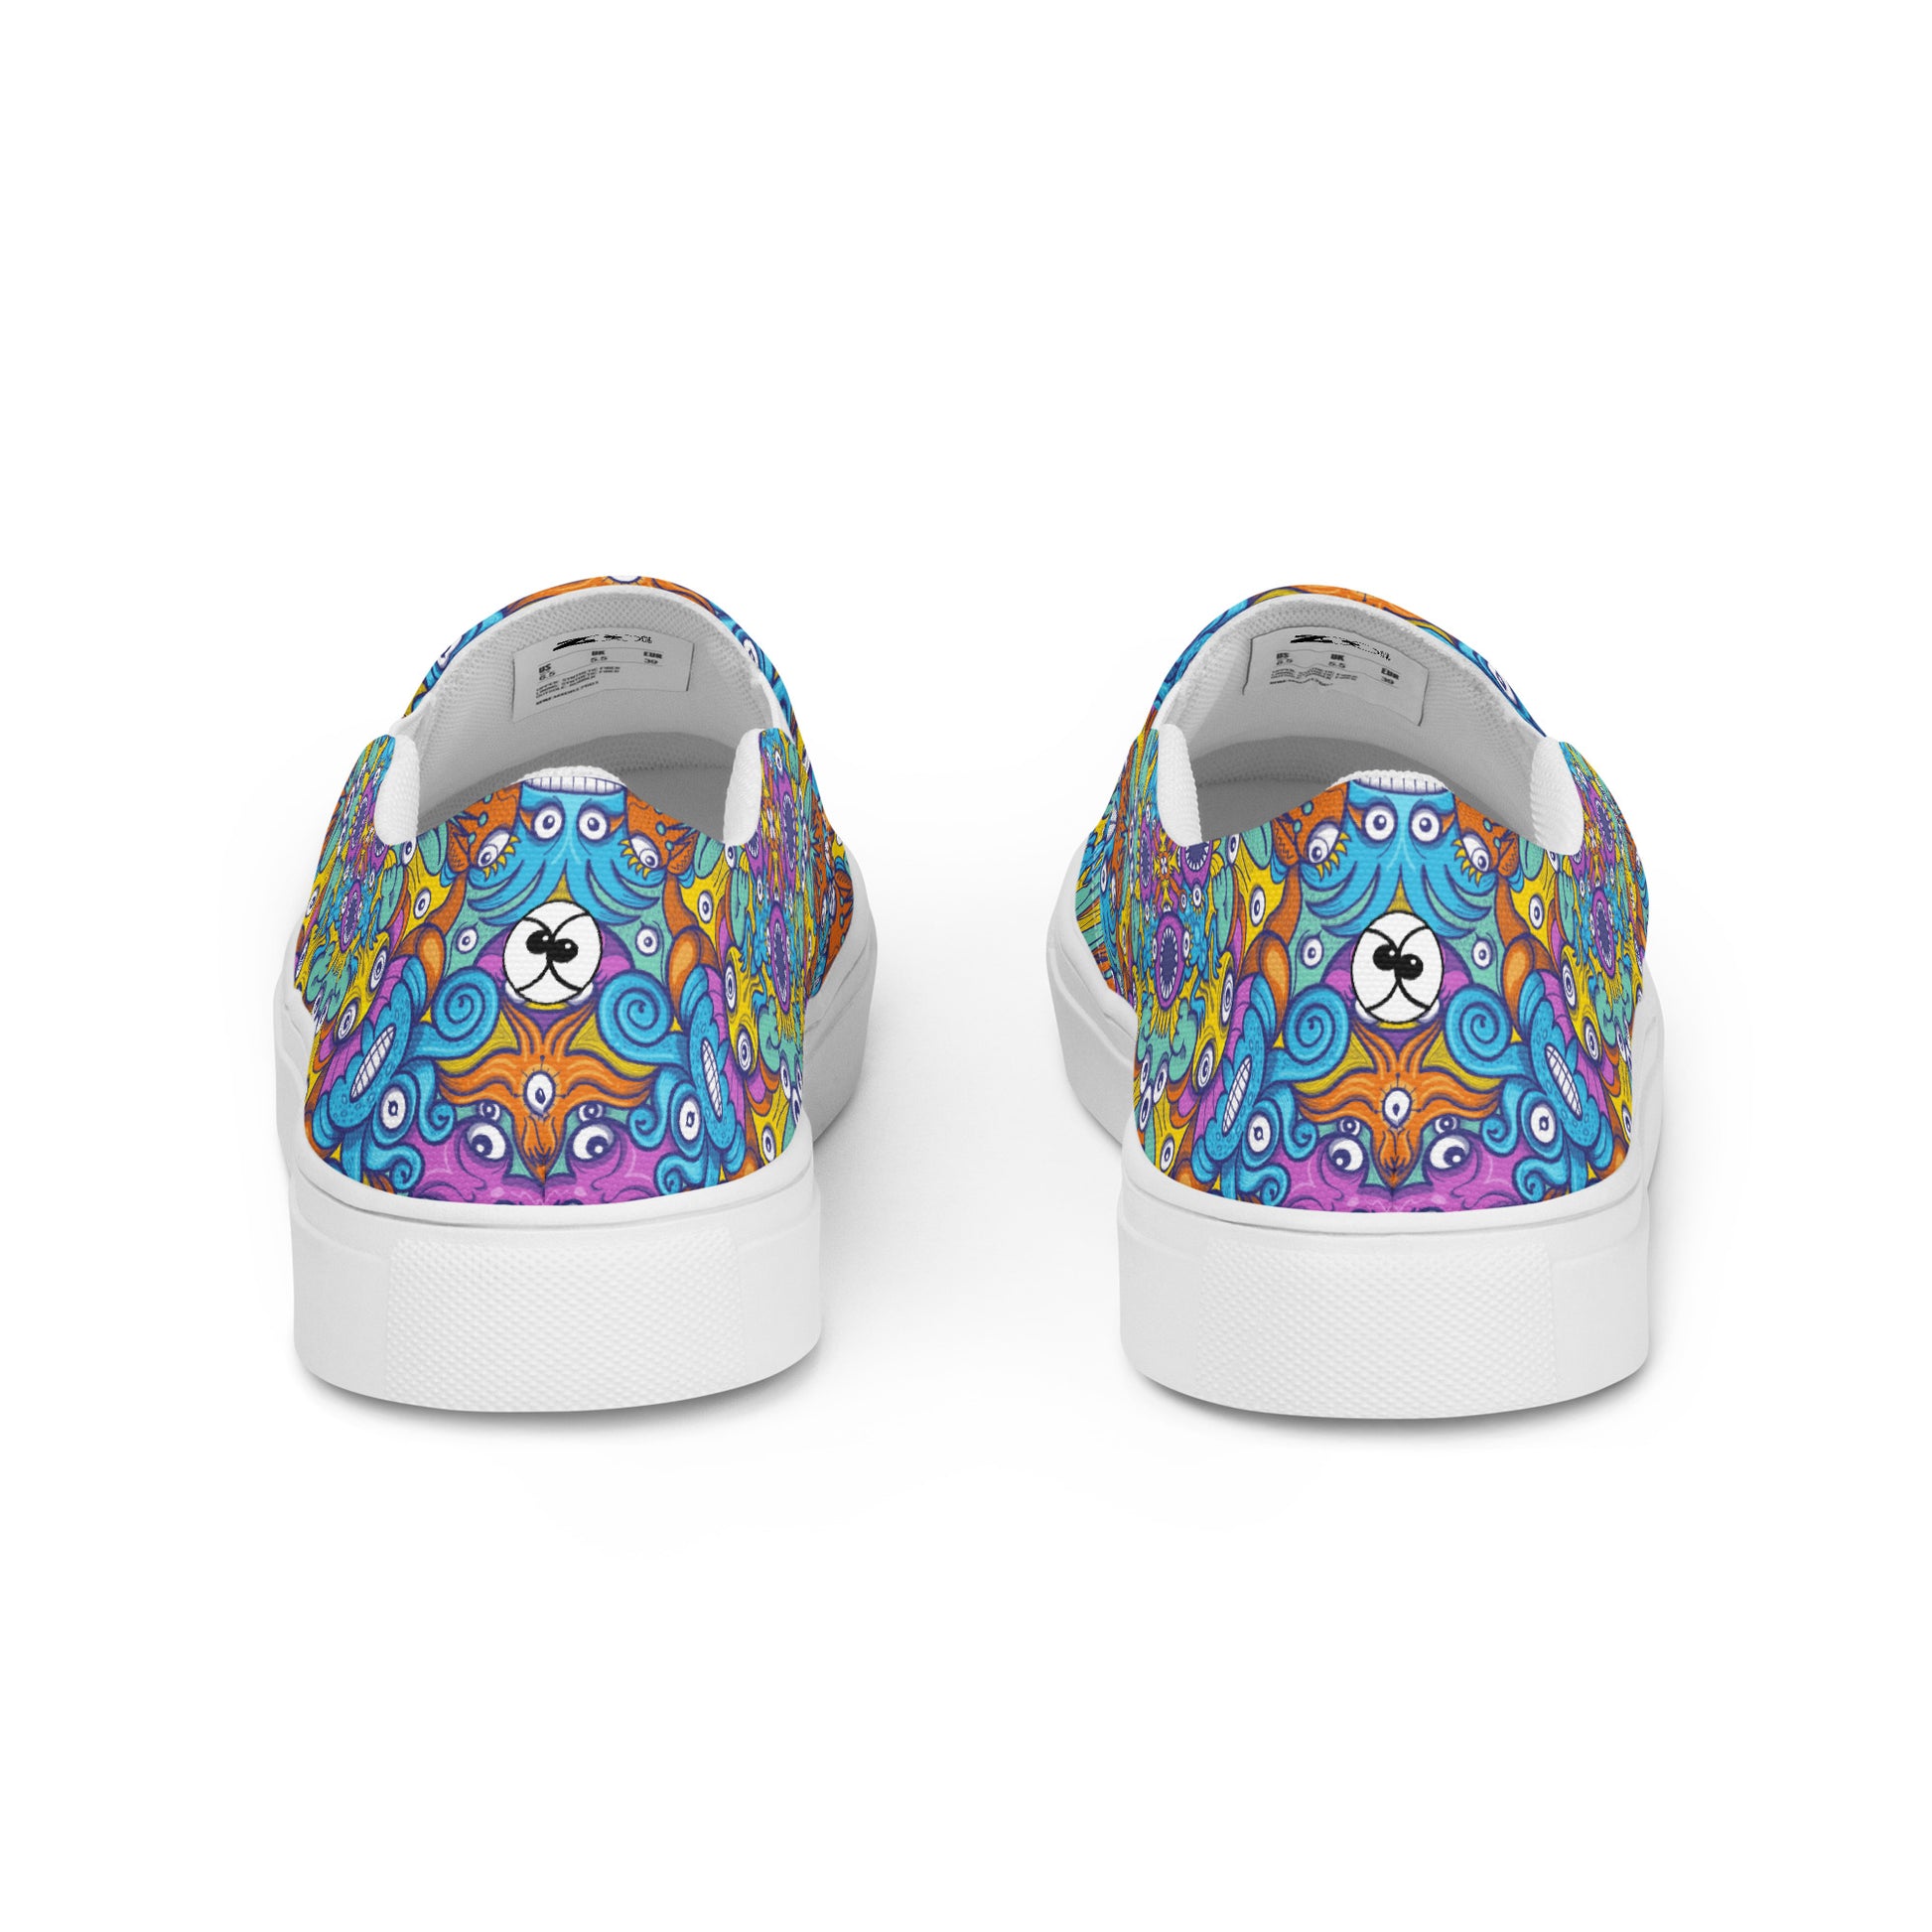 The ultimate sea beasts cast from the deep end of the ocean - Women’s slip-on canvas shoes. Back view